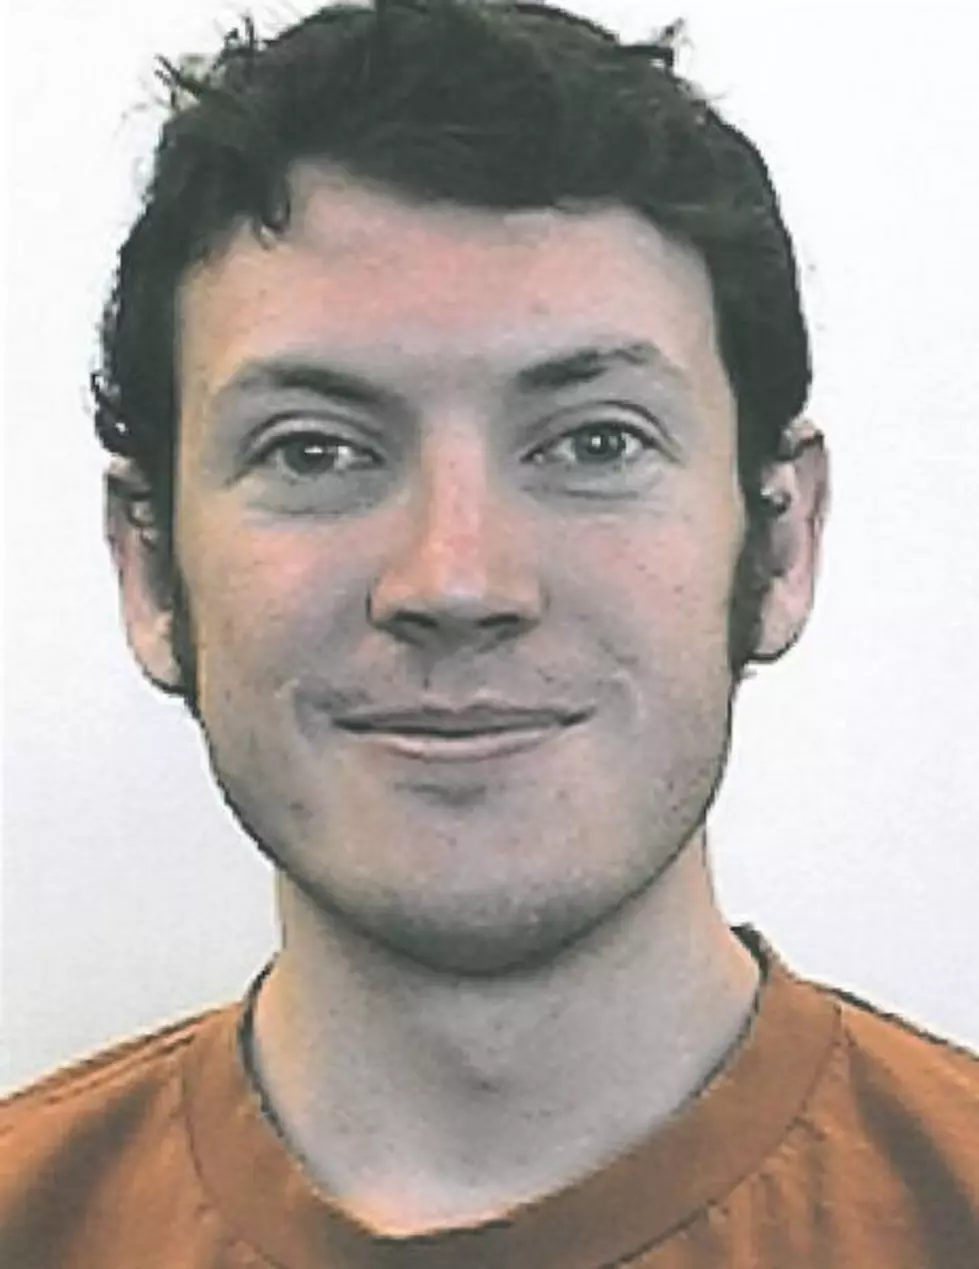 Photo of Theater Shooting Suspect James Holmes Released